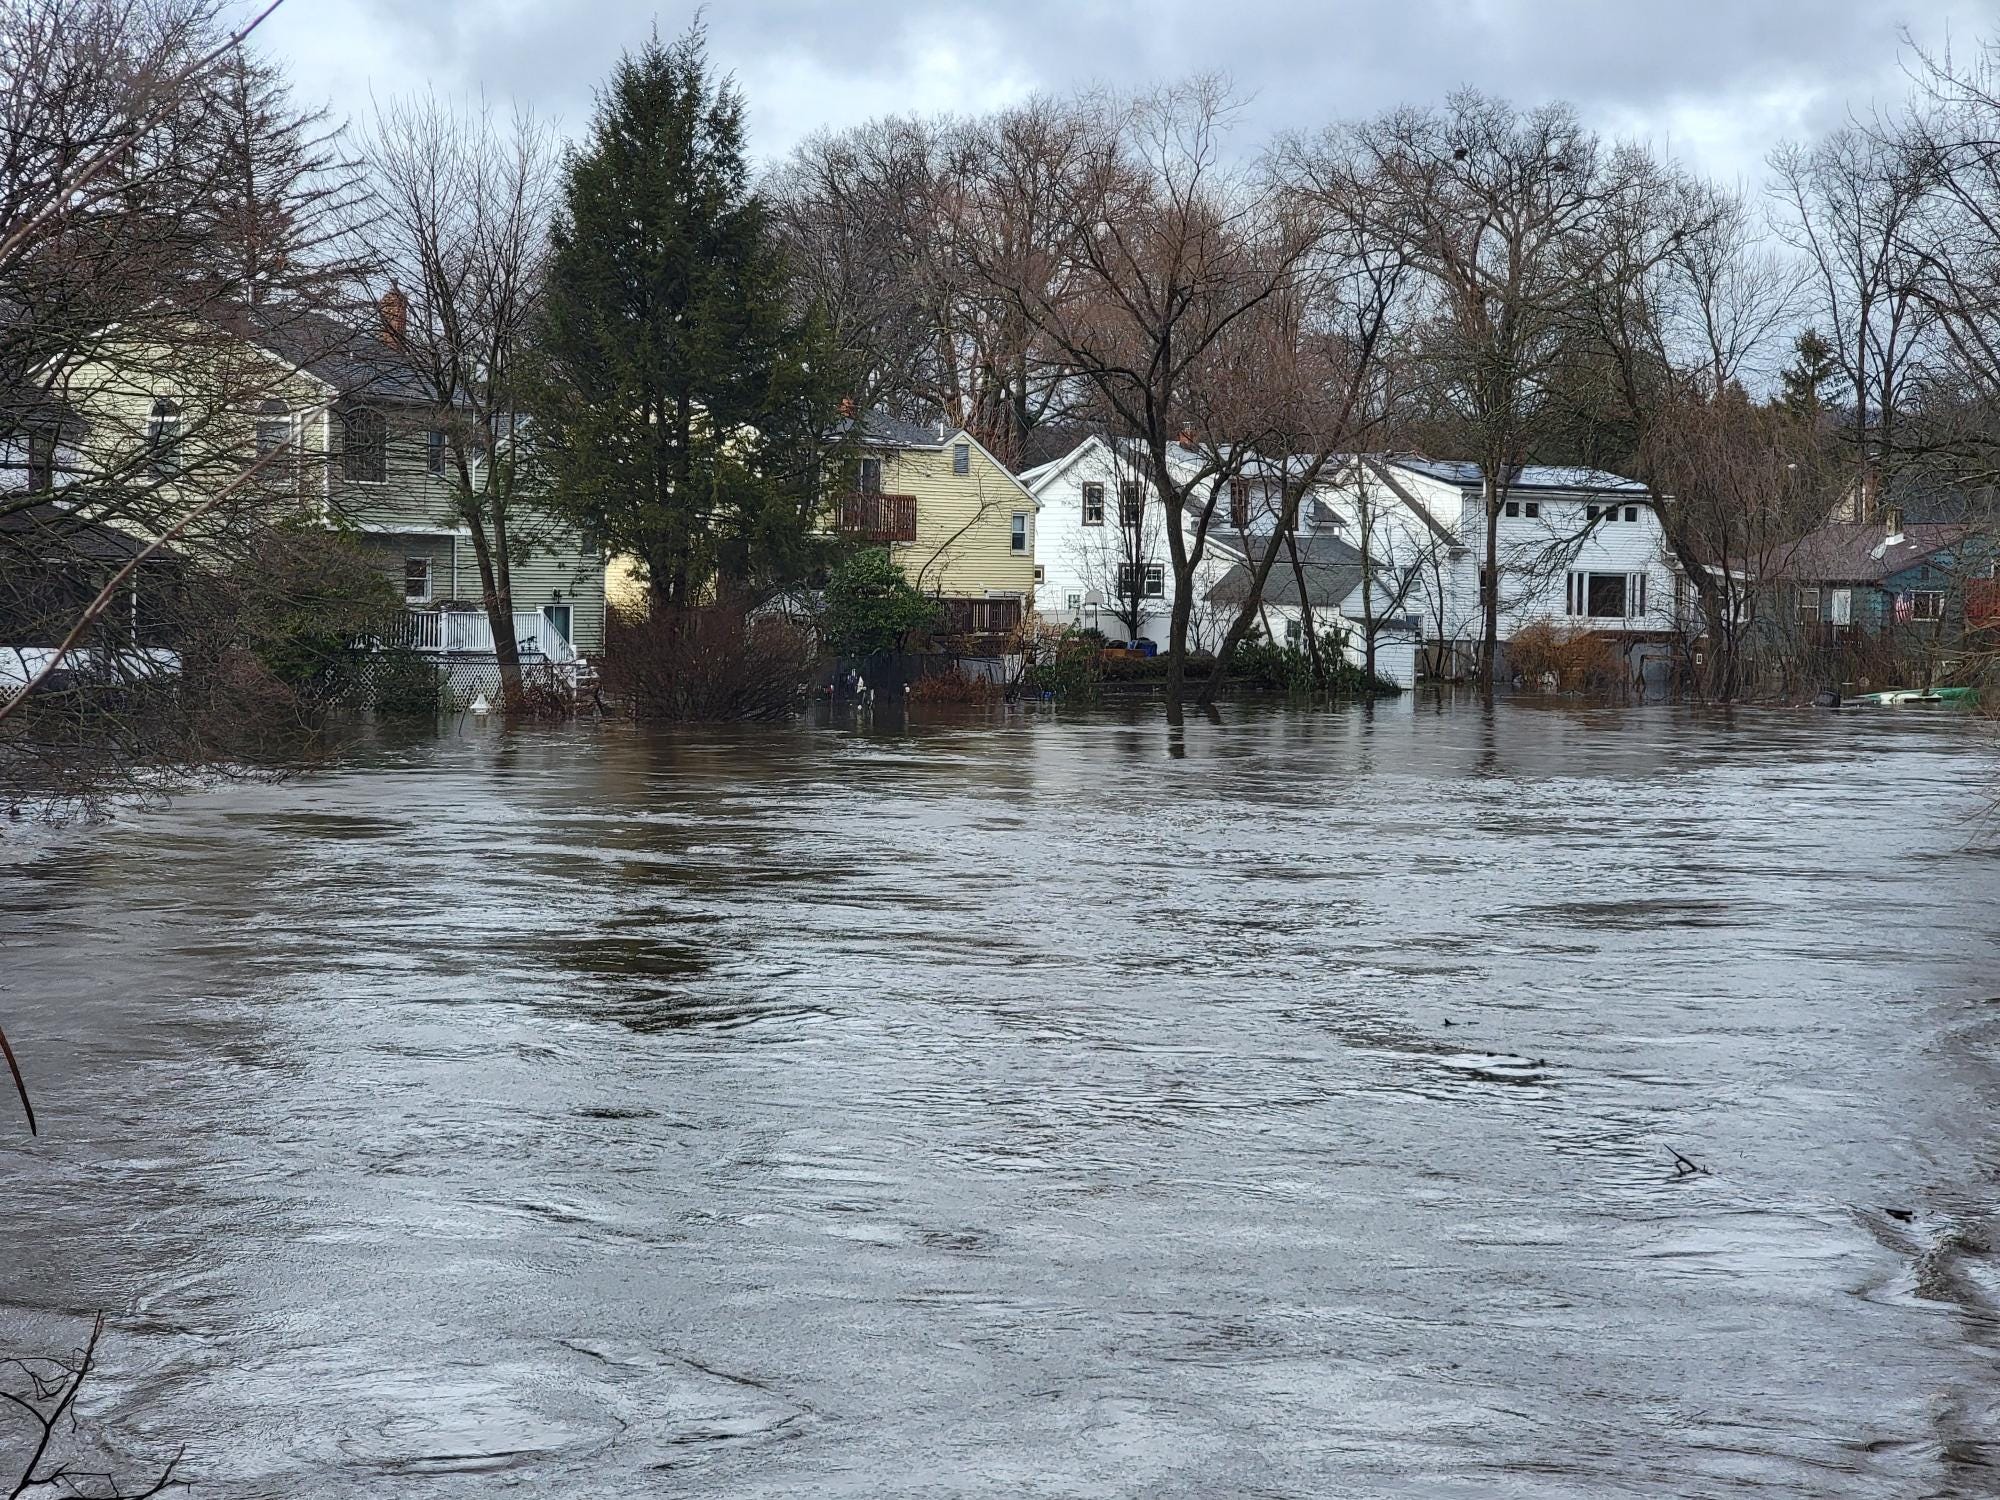 Live updates: Storm flooding and highway closures continue in North Jersey